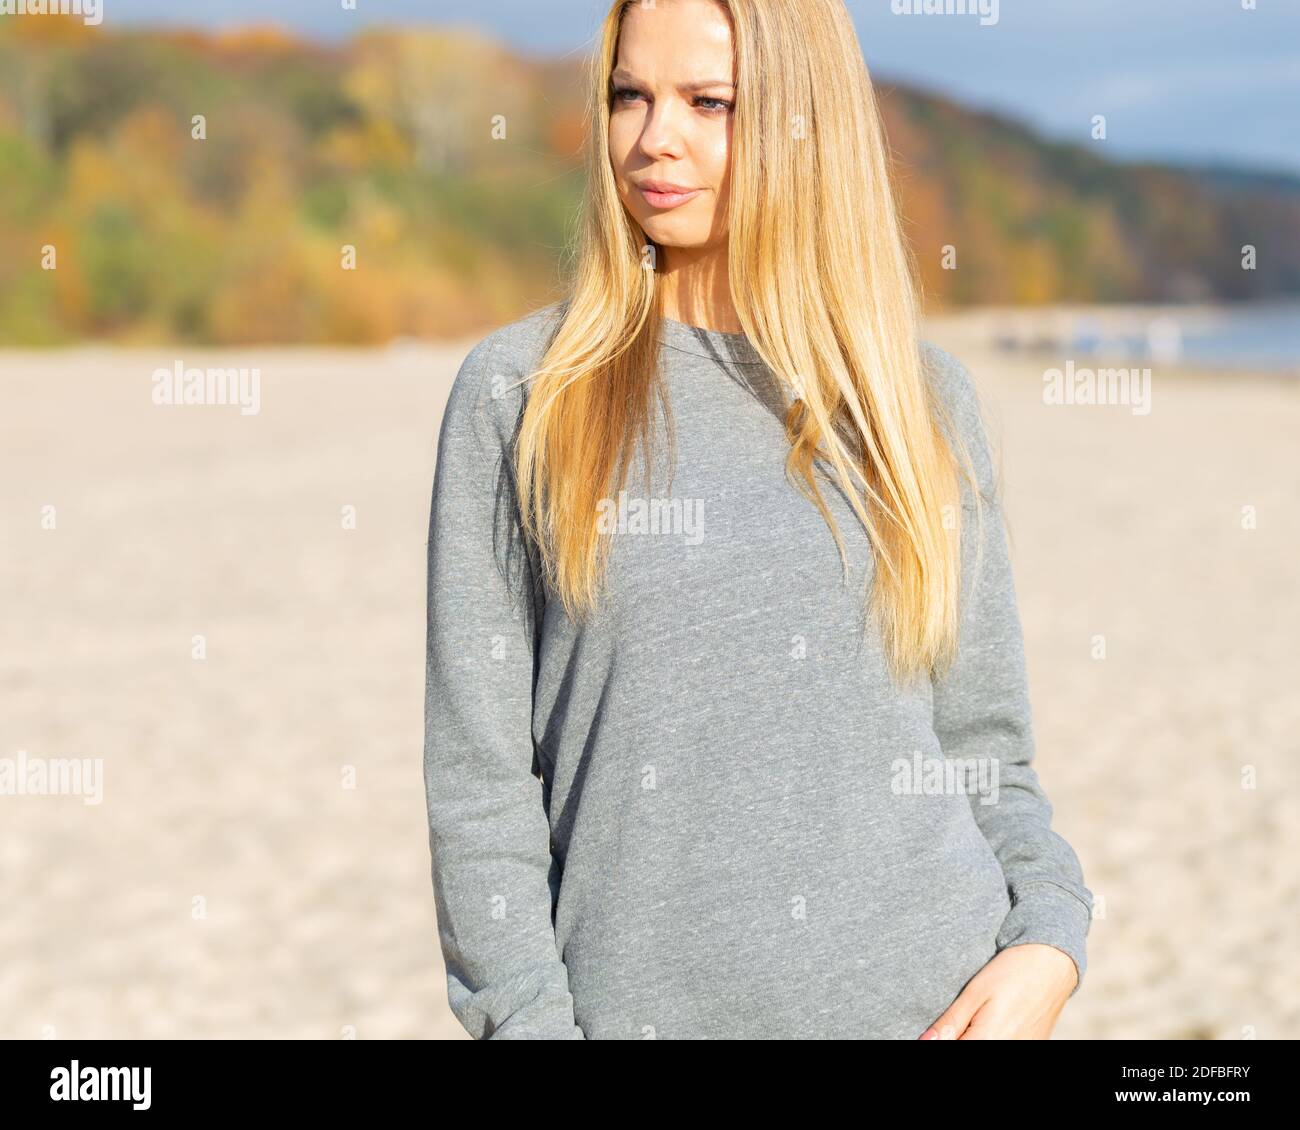 Blond woman in grey blouse is standing on beach and looking on side. She is posing outdoor for fashion mockup. Stock Photo